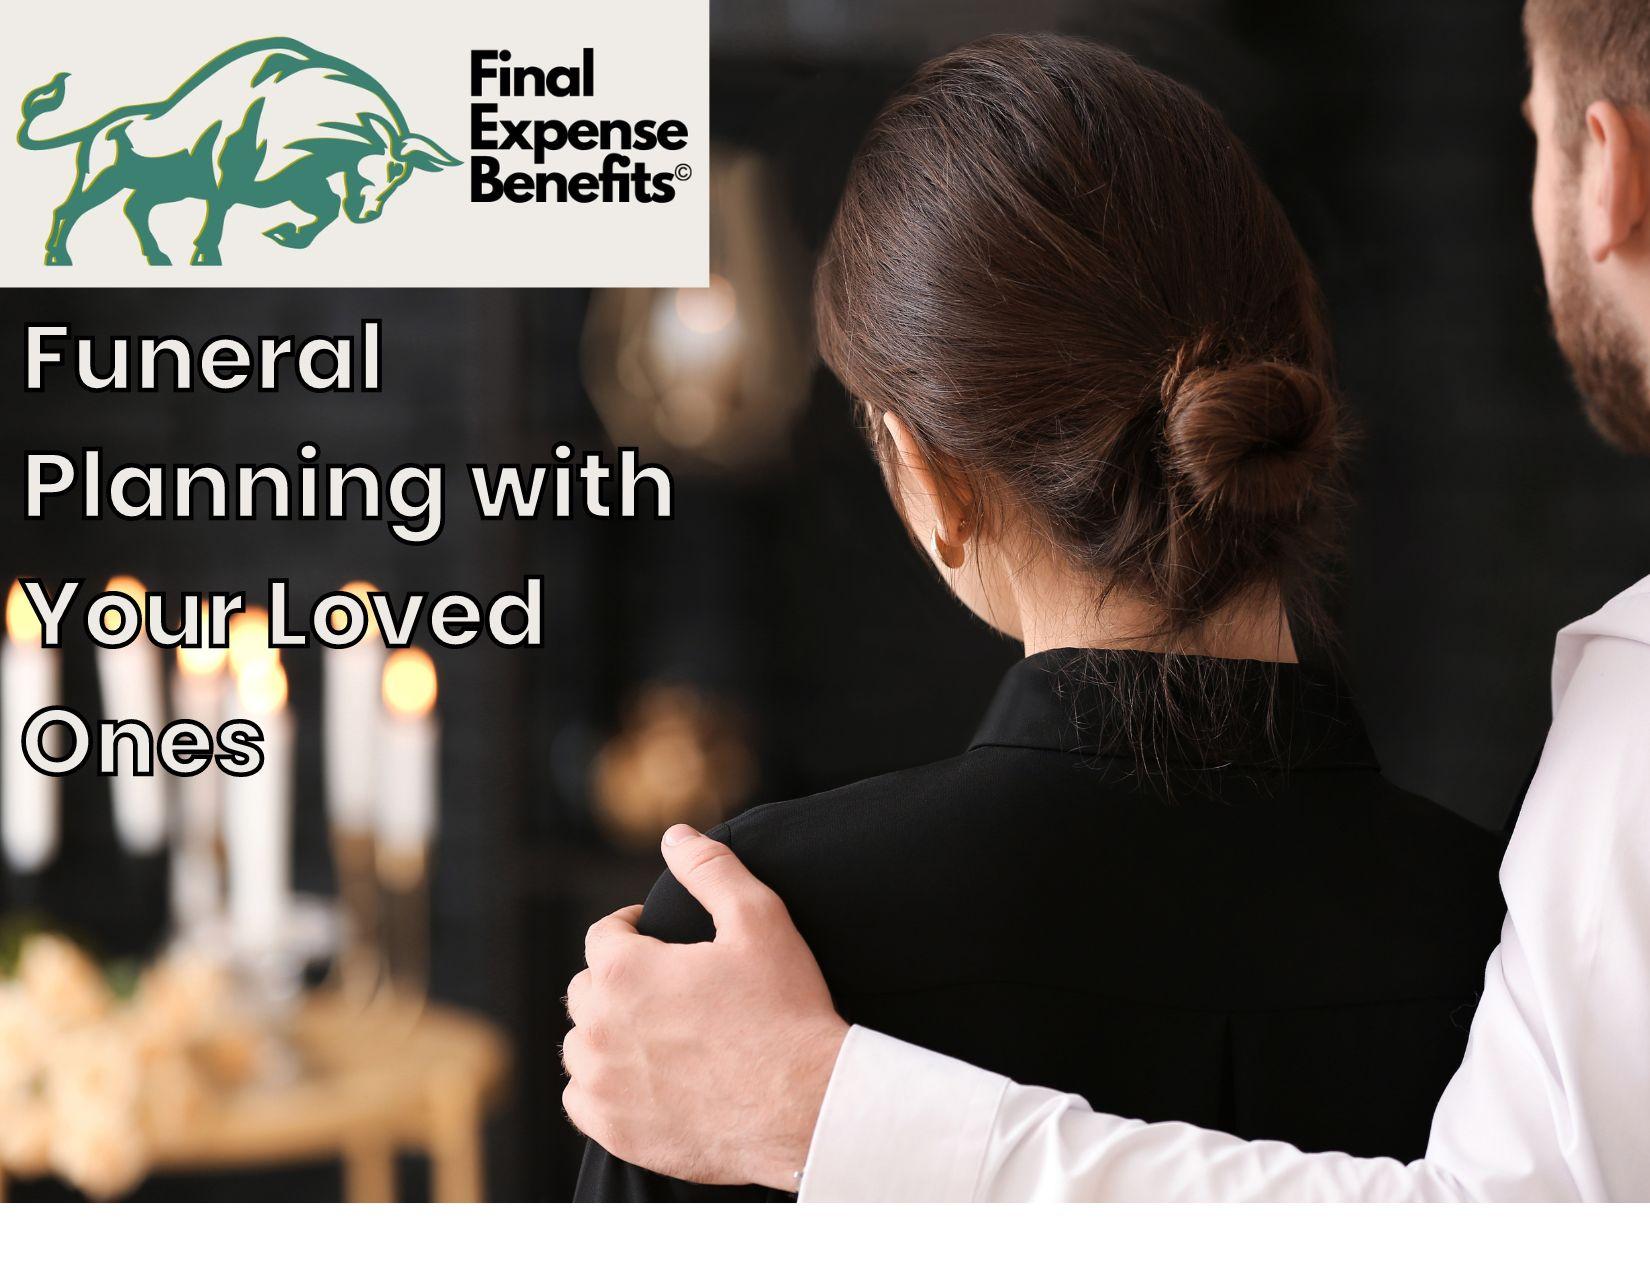 A man and woman standing next to year other. The man is side hugging the woman while looking at candles that are not in focus. The Final Expense Benefits Logo is above text that ways "Funeral Planning with Your Loved Ones".